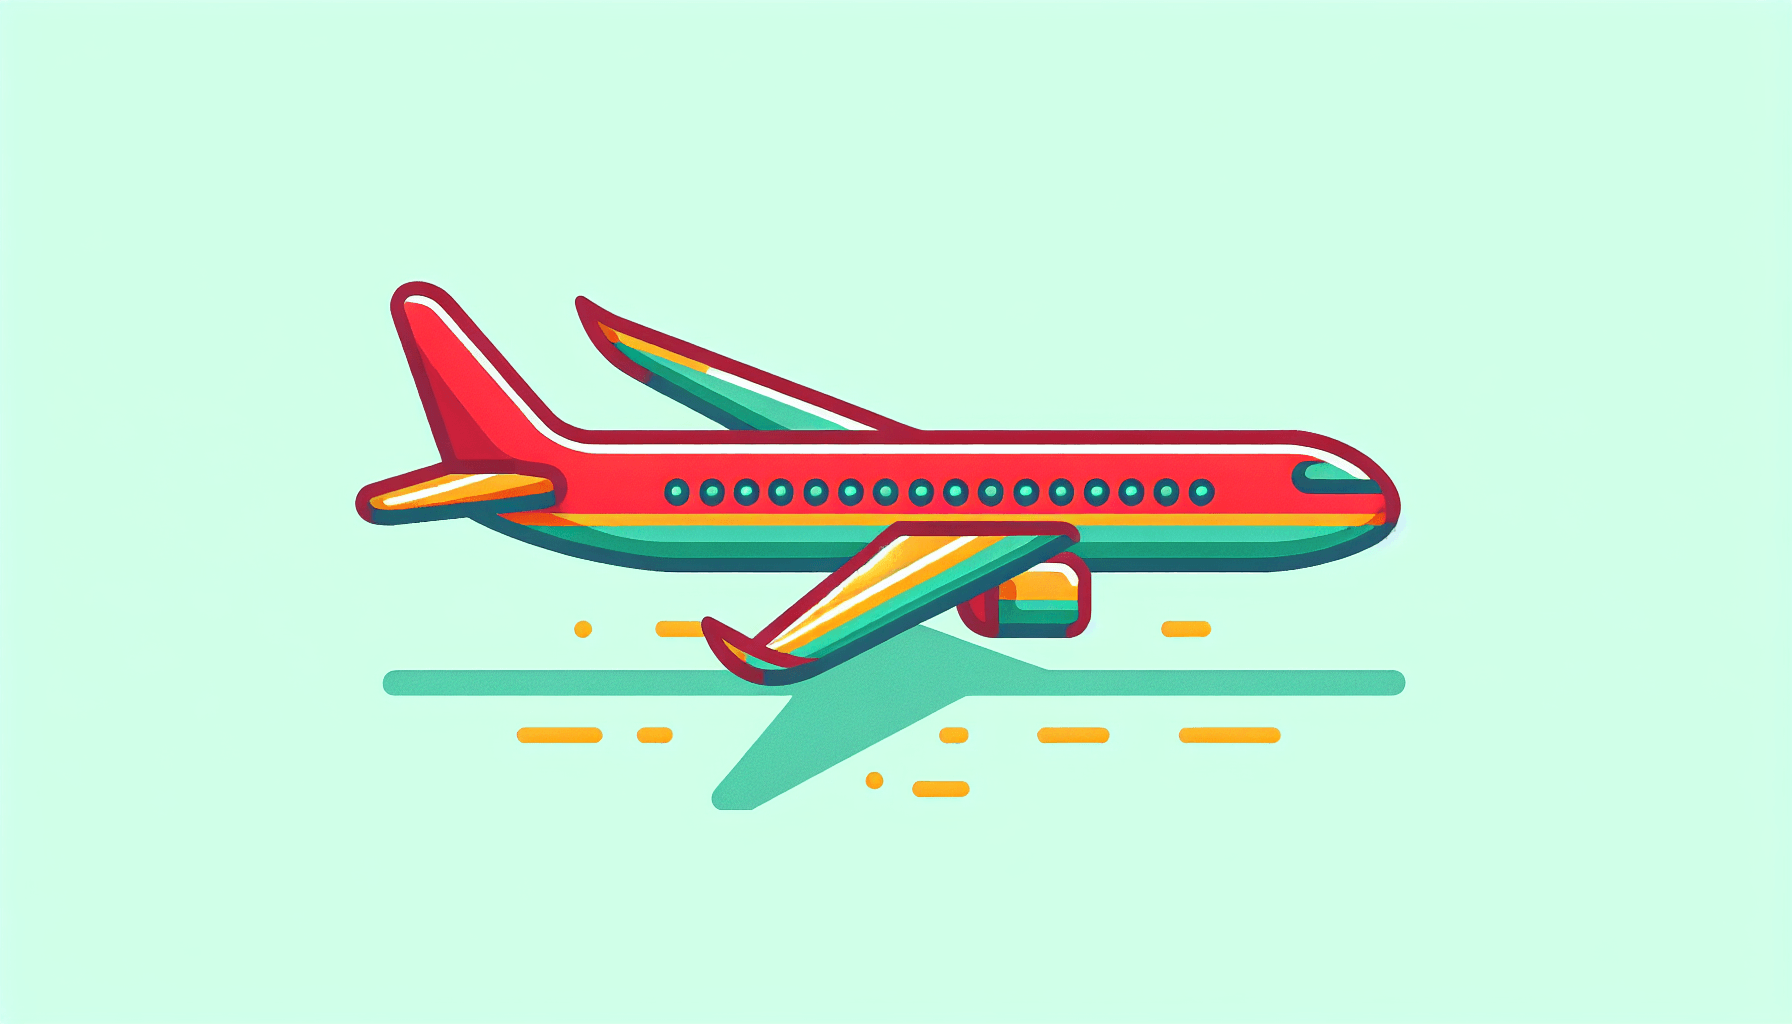 Airplane in flat illustration style and white background, red #f47574, green #88c7a8, yellow #fcc44b, and blue #645bc8 colors.